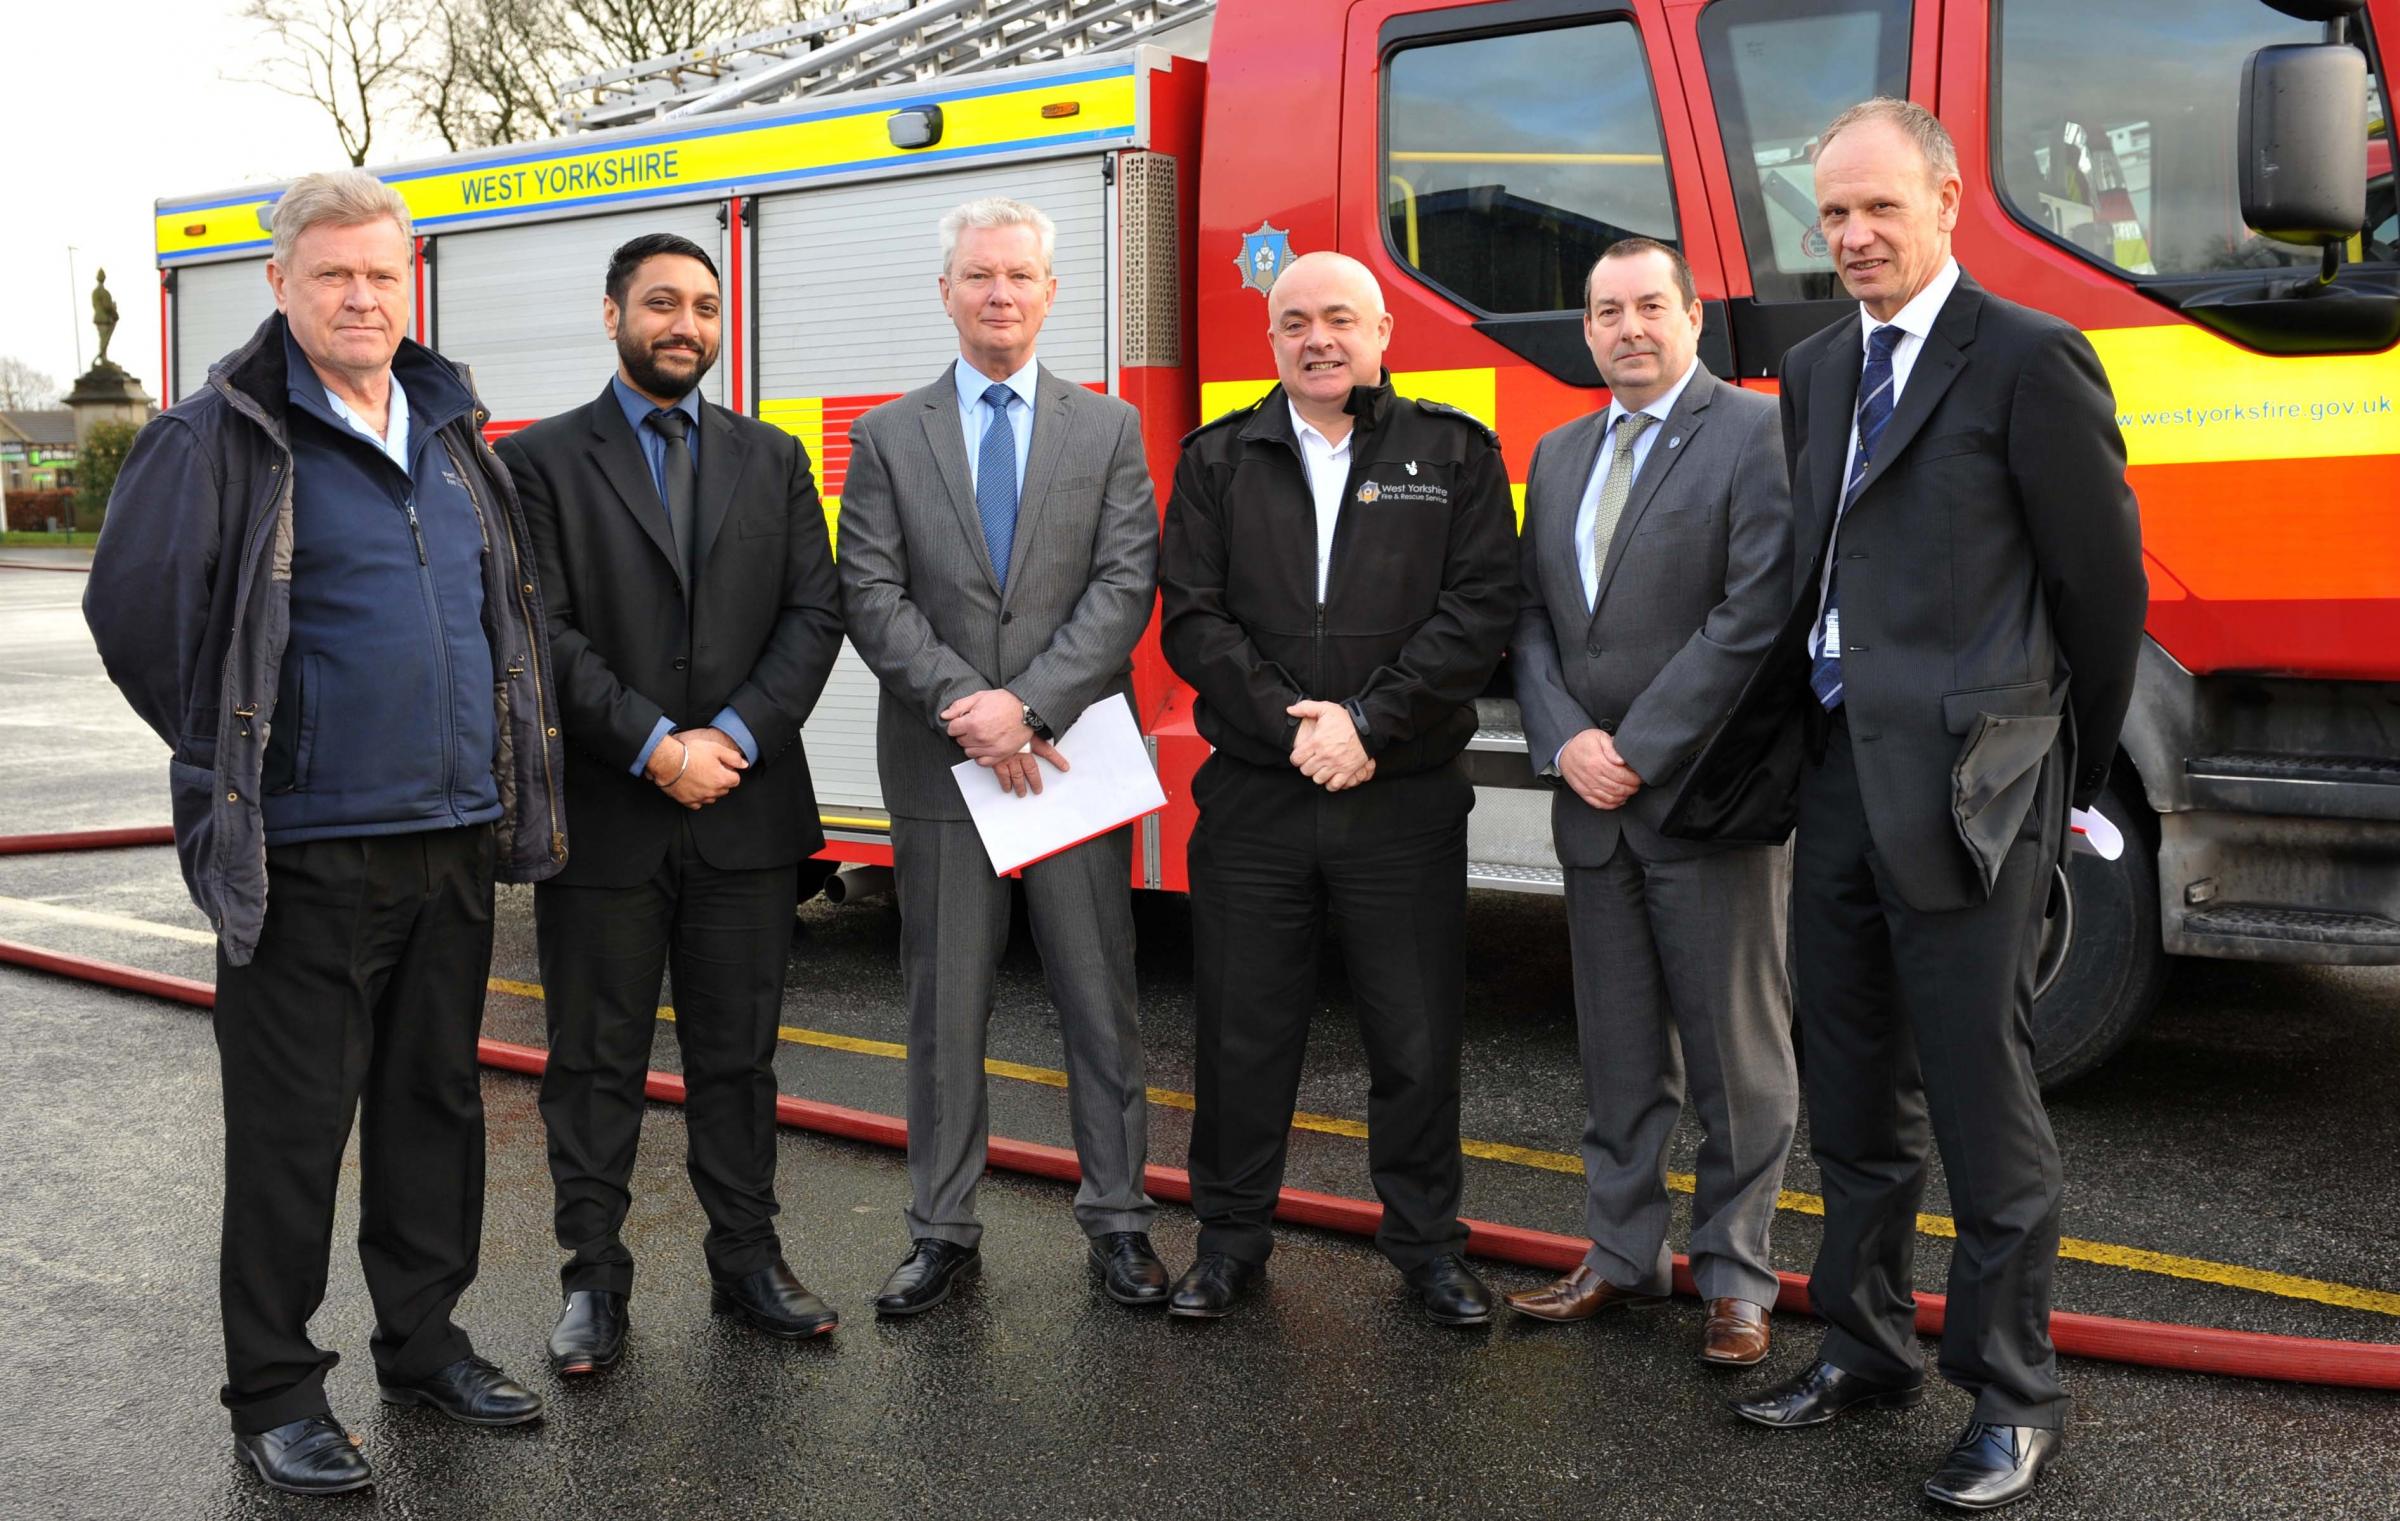 Bank signs up for safety advice from West Yorkshire Fire Service